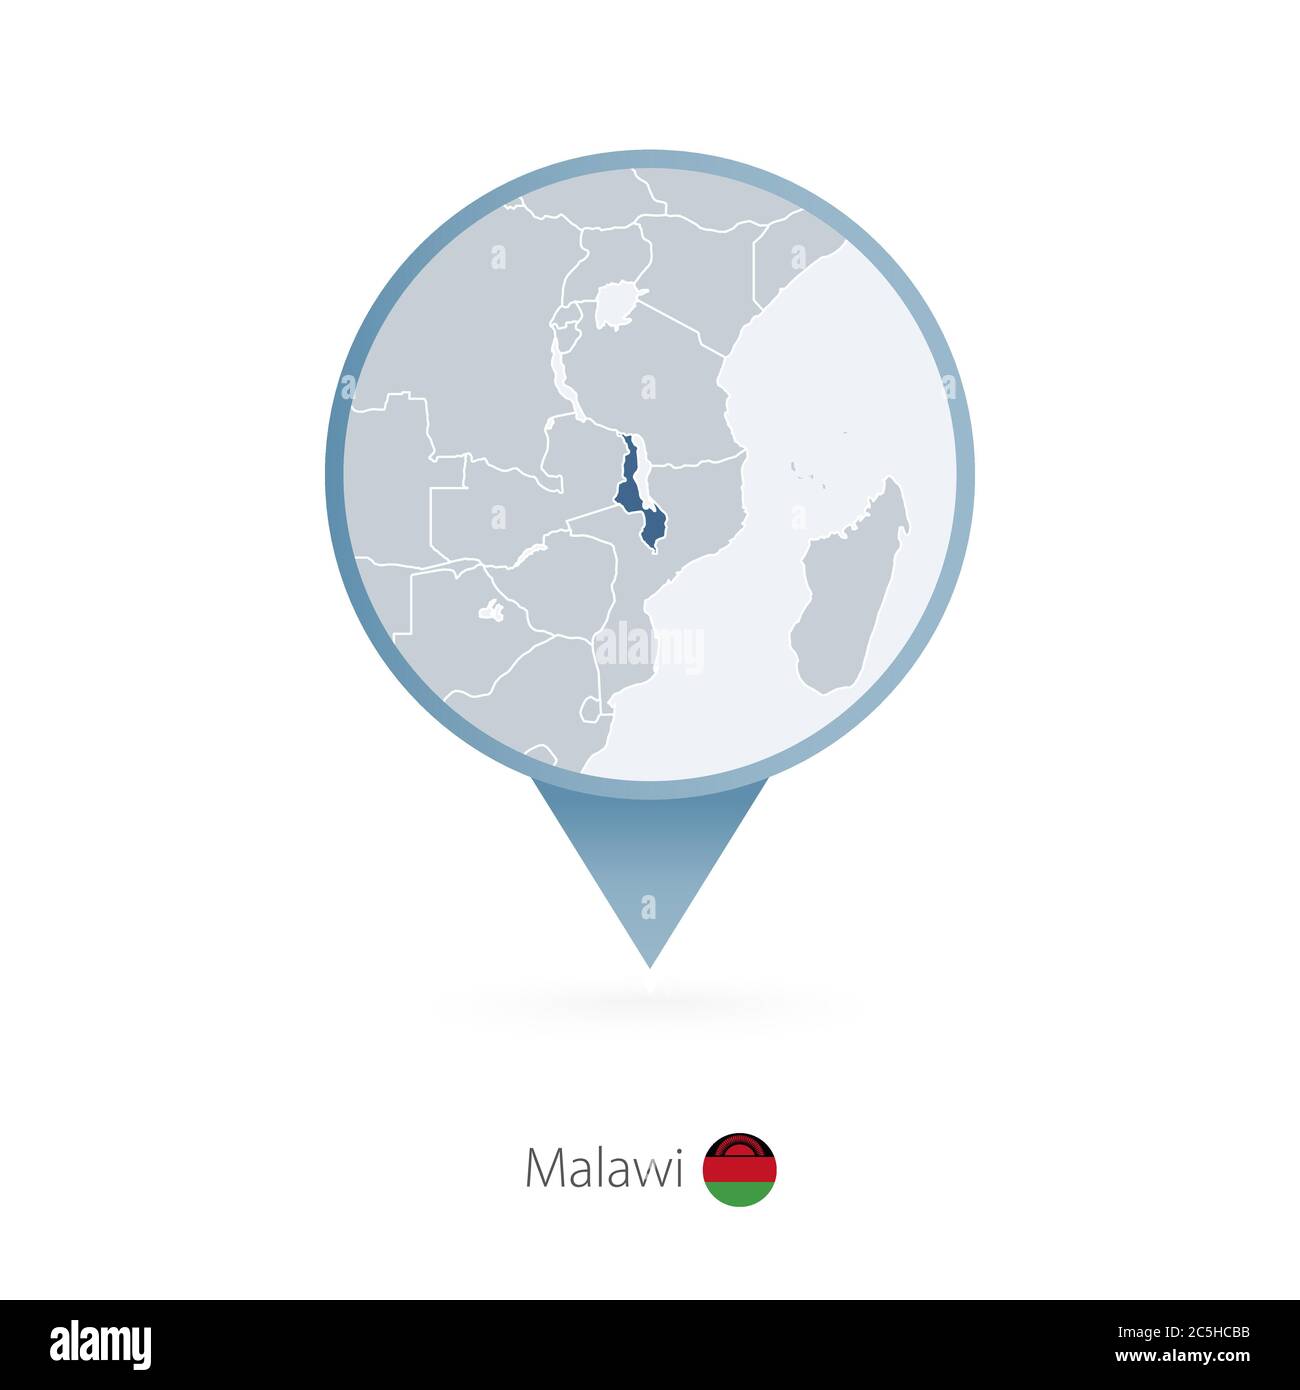 Map Pin With Detailed Map Of Malawi And Neighboring Countries 2C5HCBB 